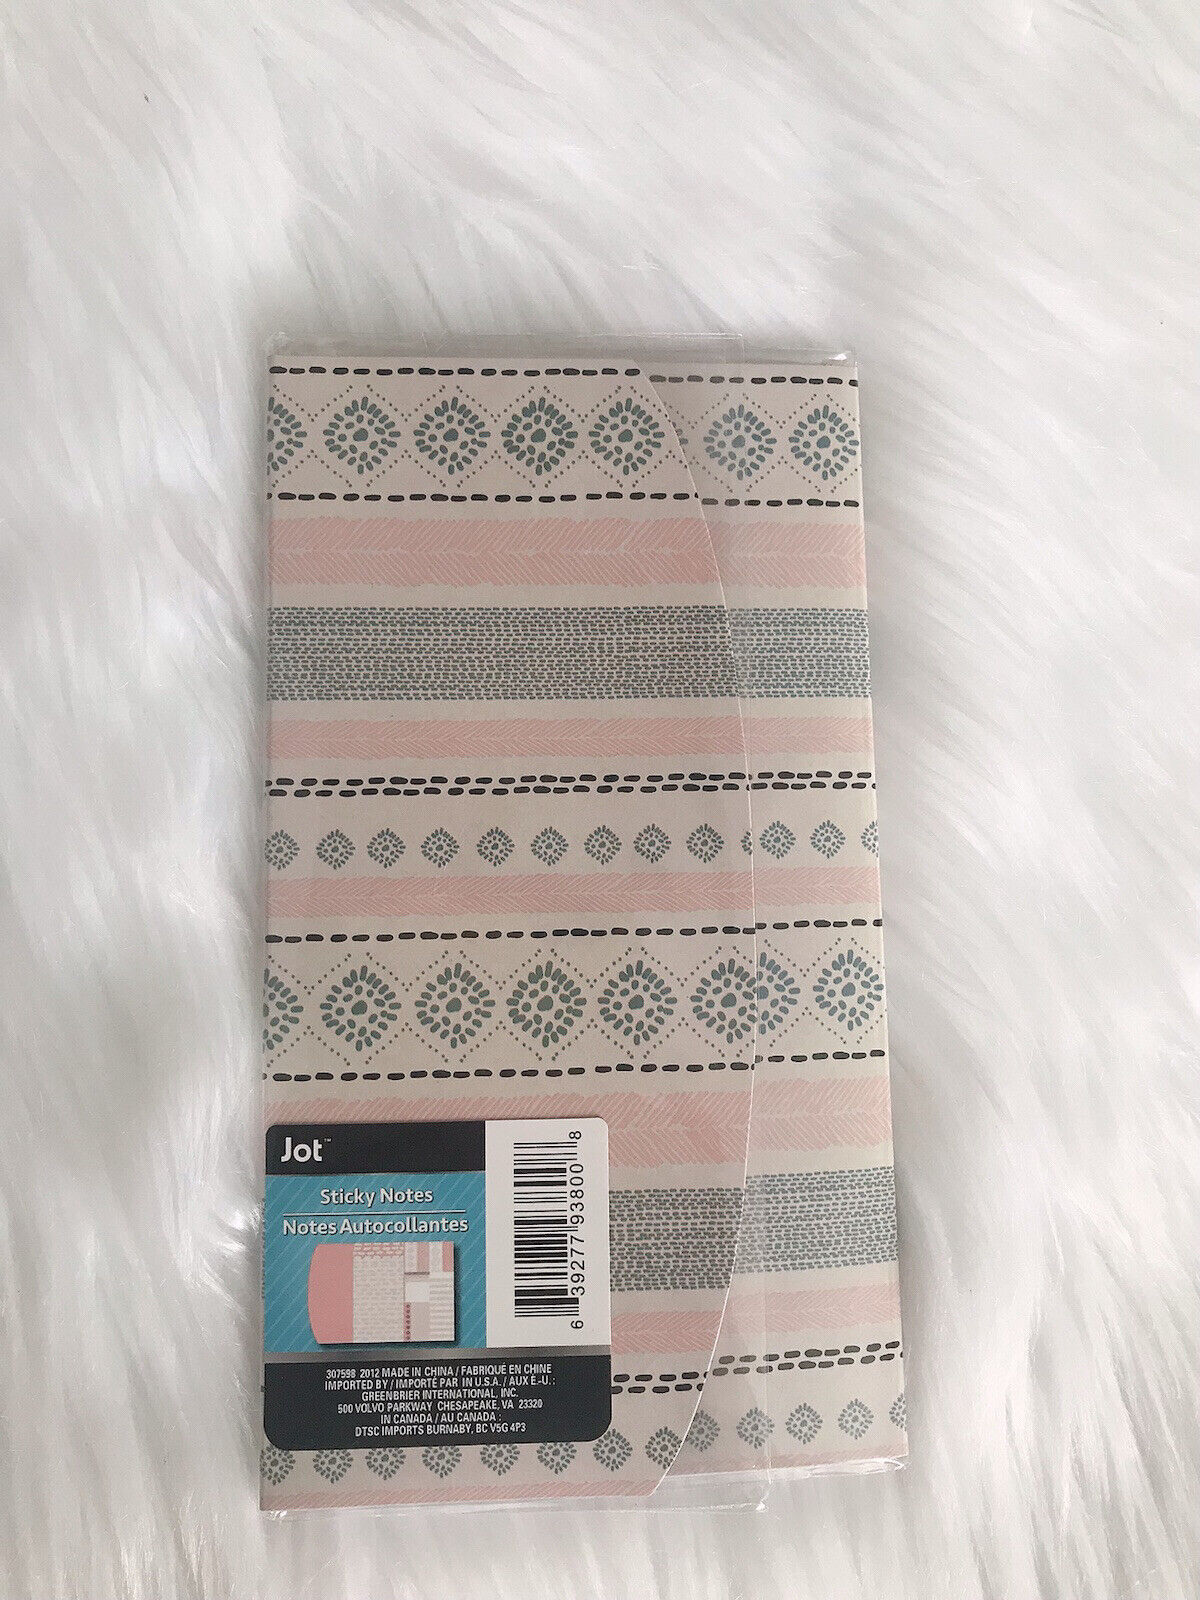 Jot Sticky Notes Memo pad booklet